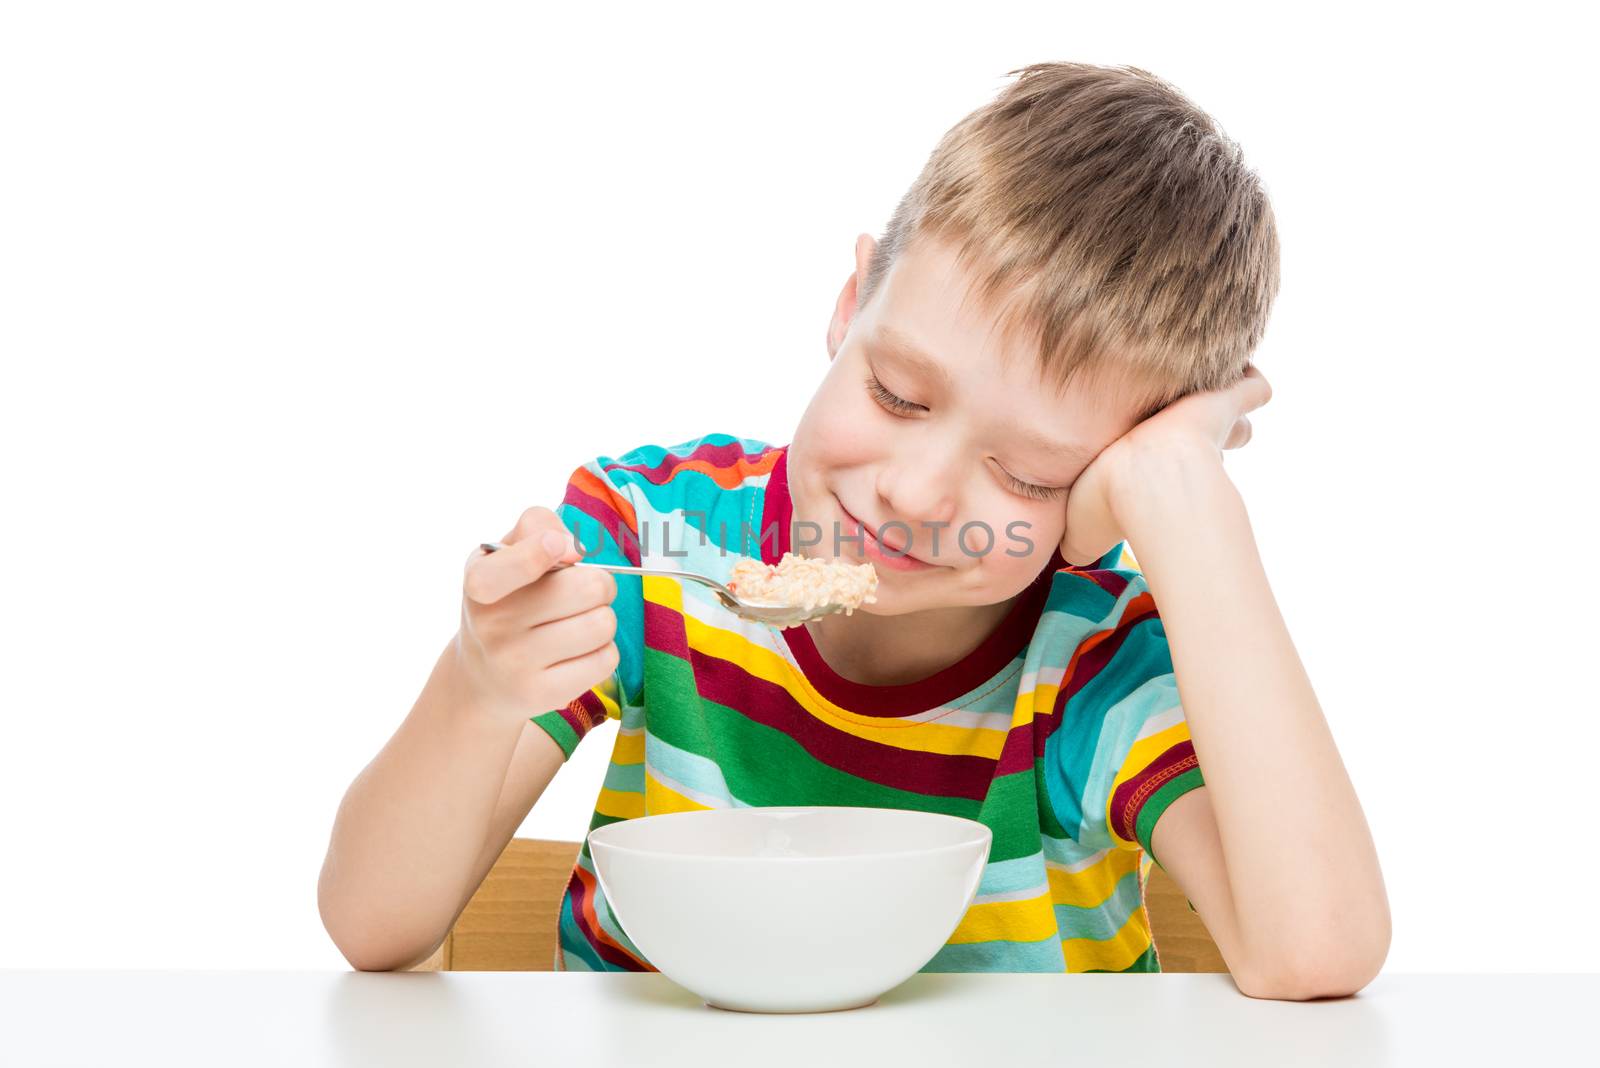 healthy food - oatmeal for breakfast, a boy with a plate on a white background